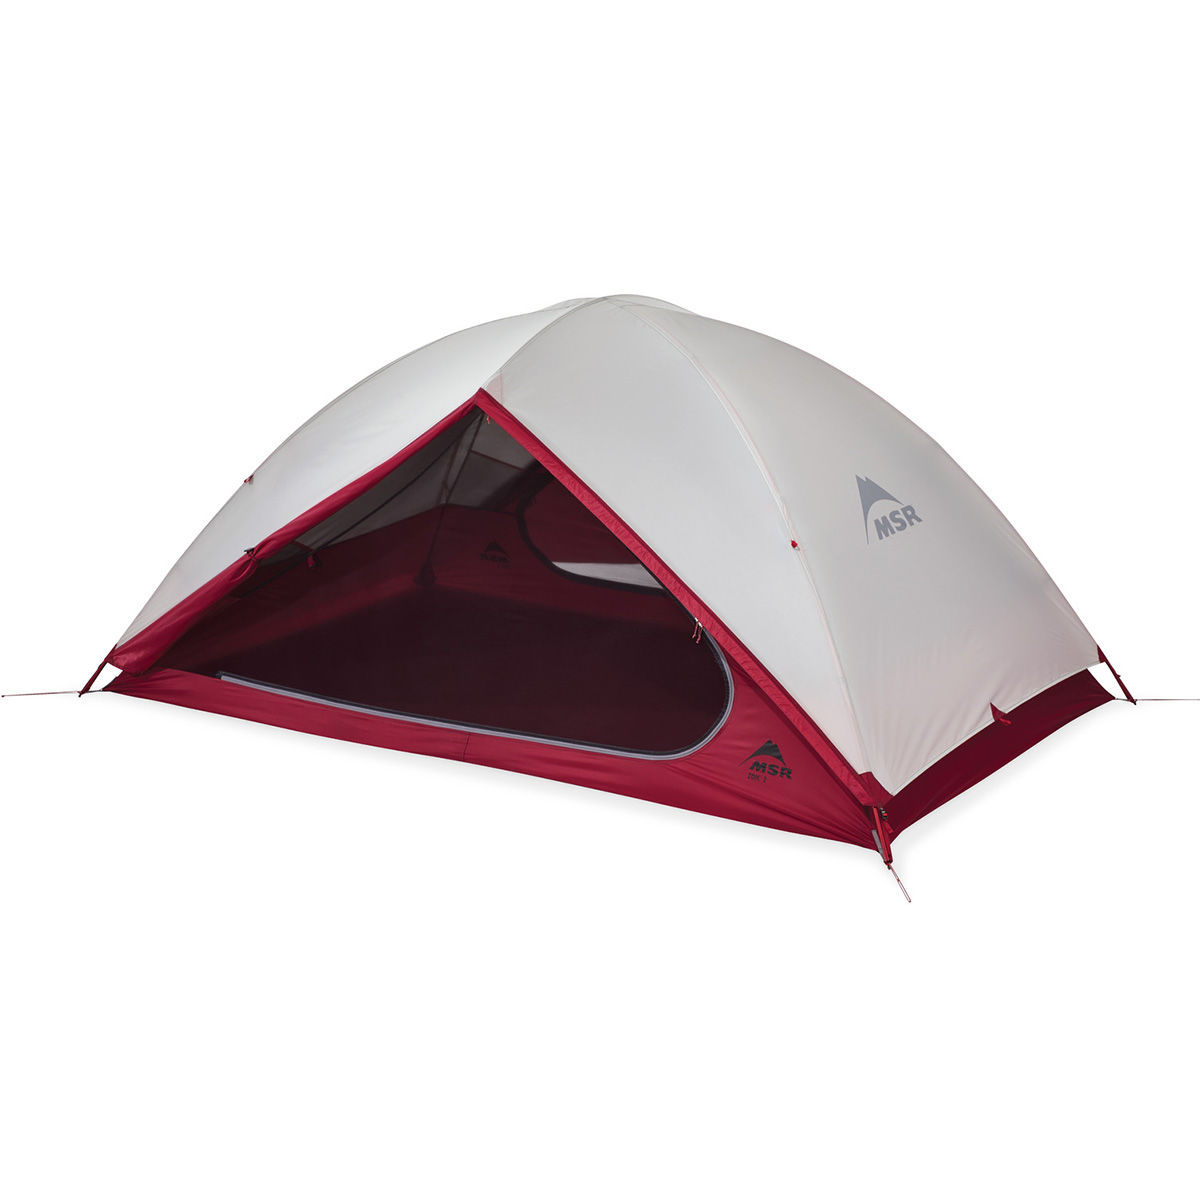 msr-zoic-2-backpacking-tent-2-people-gr